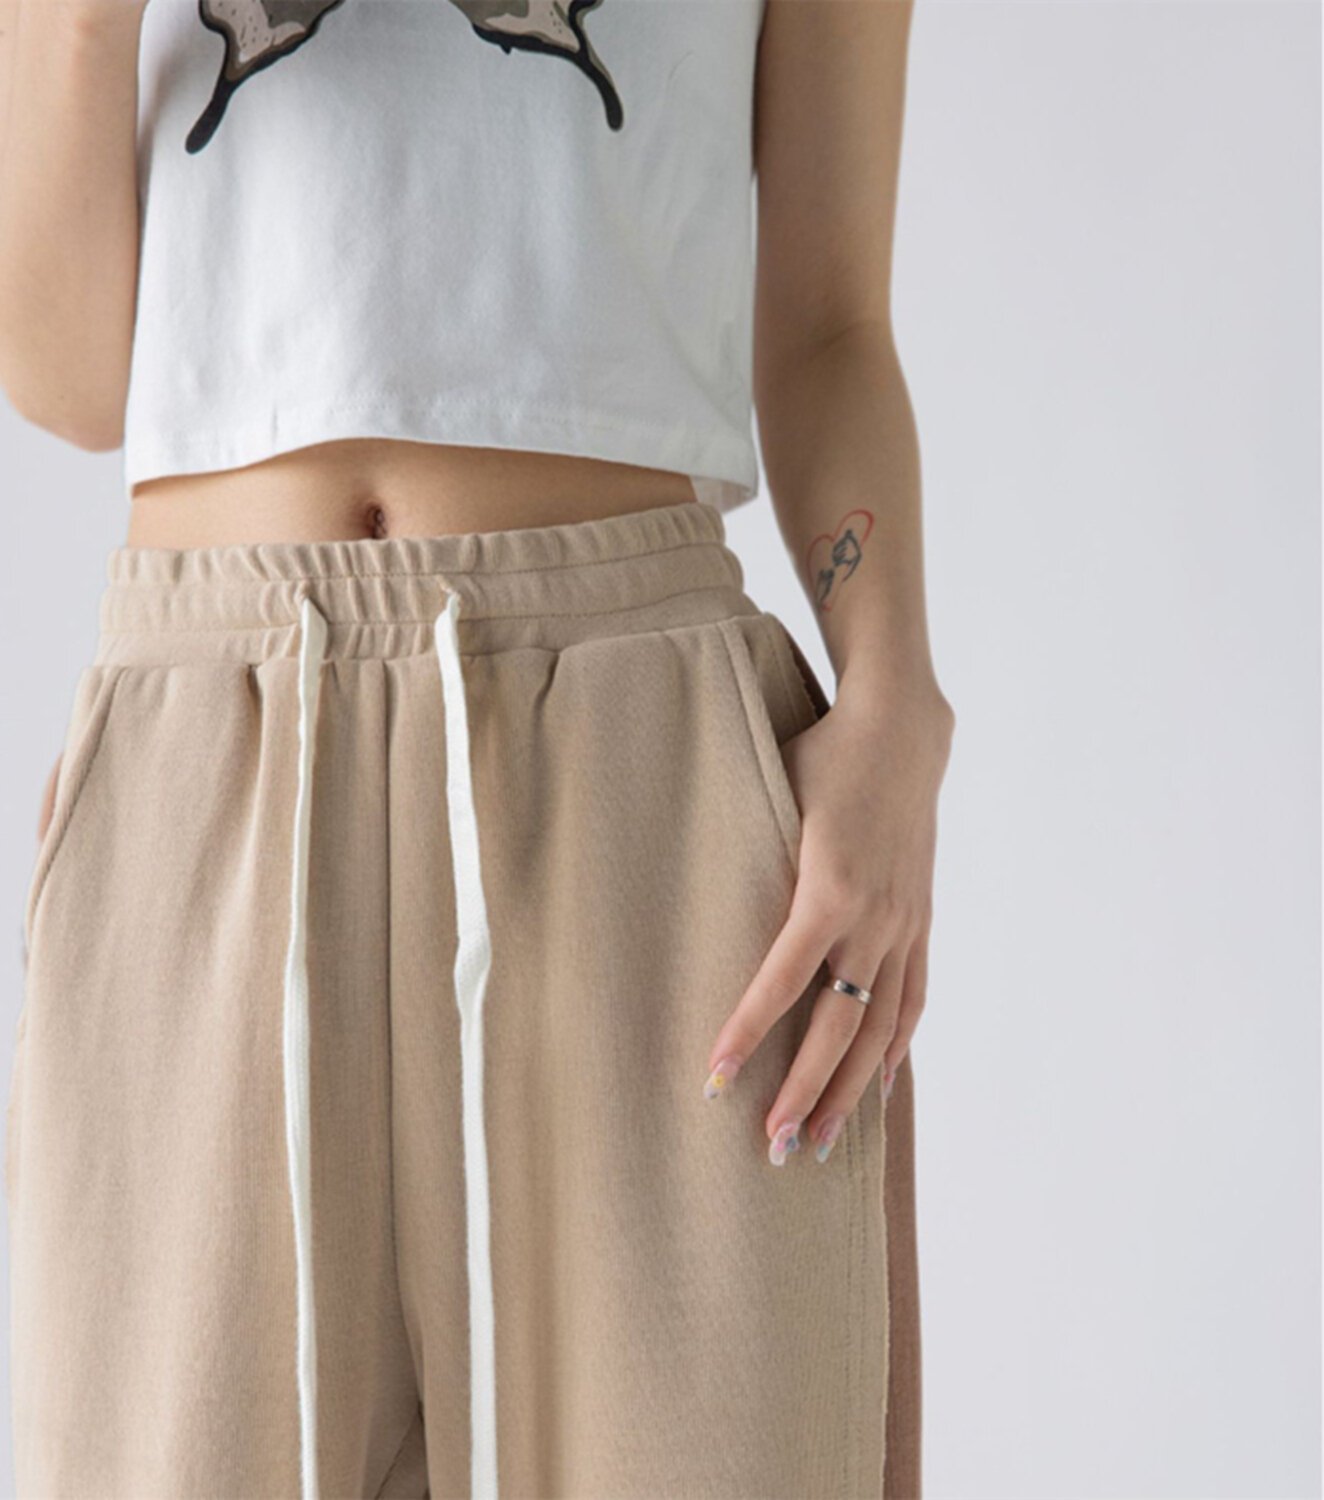 Spring and Autumn New Split Wide Leg Casual Sports Pants